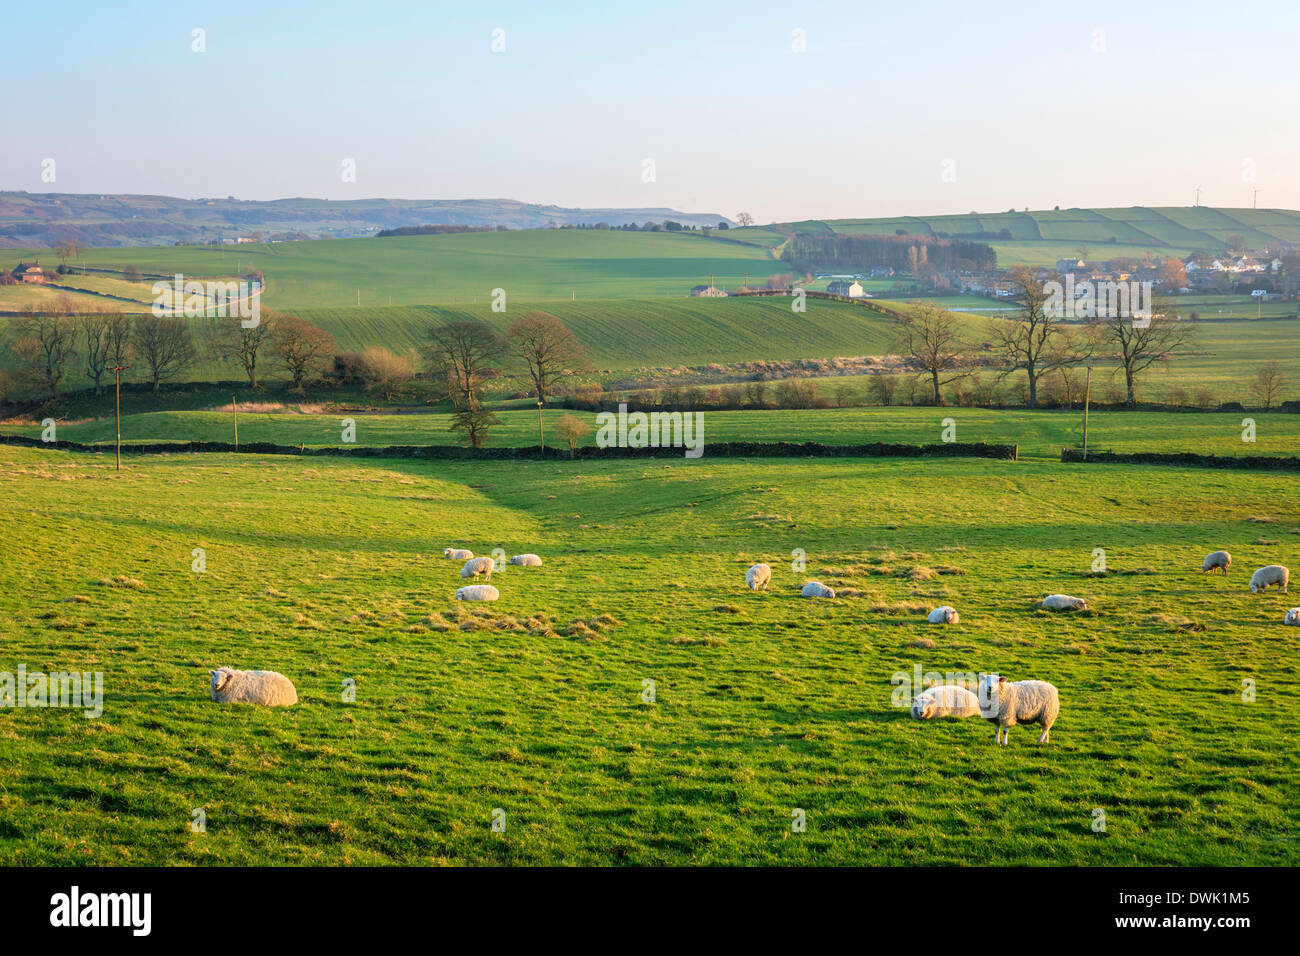 Field of sheep in the late afternoon sunshine, near Thurstonland, Holme Valley, West Yorkshire, England, UK Stock Photo